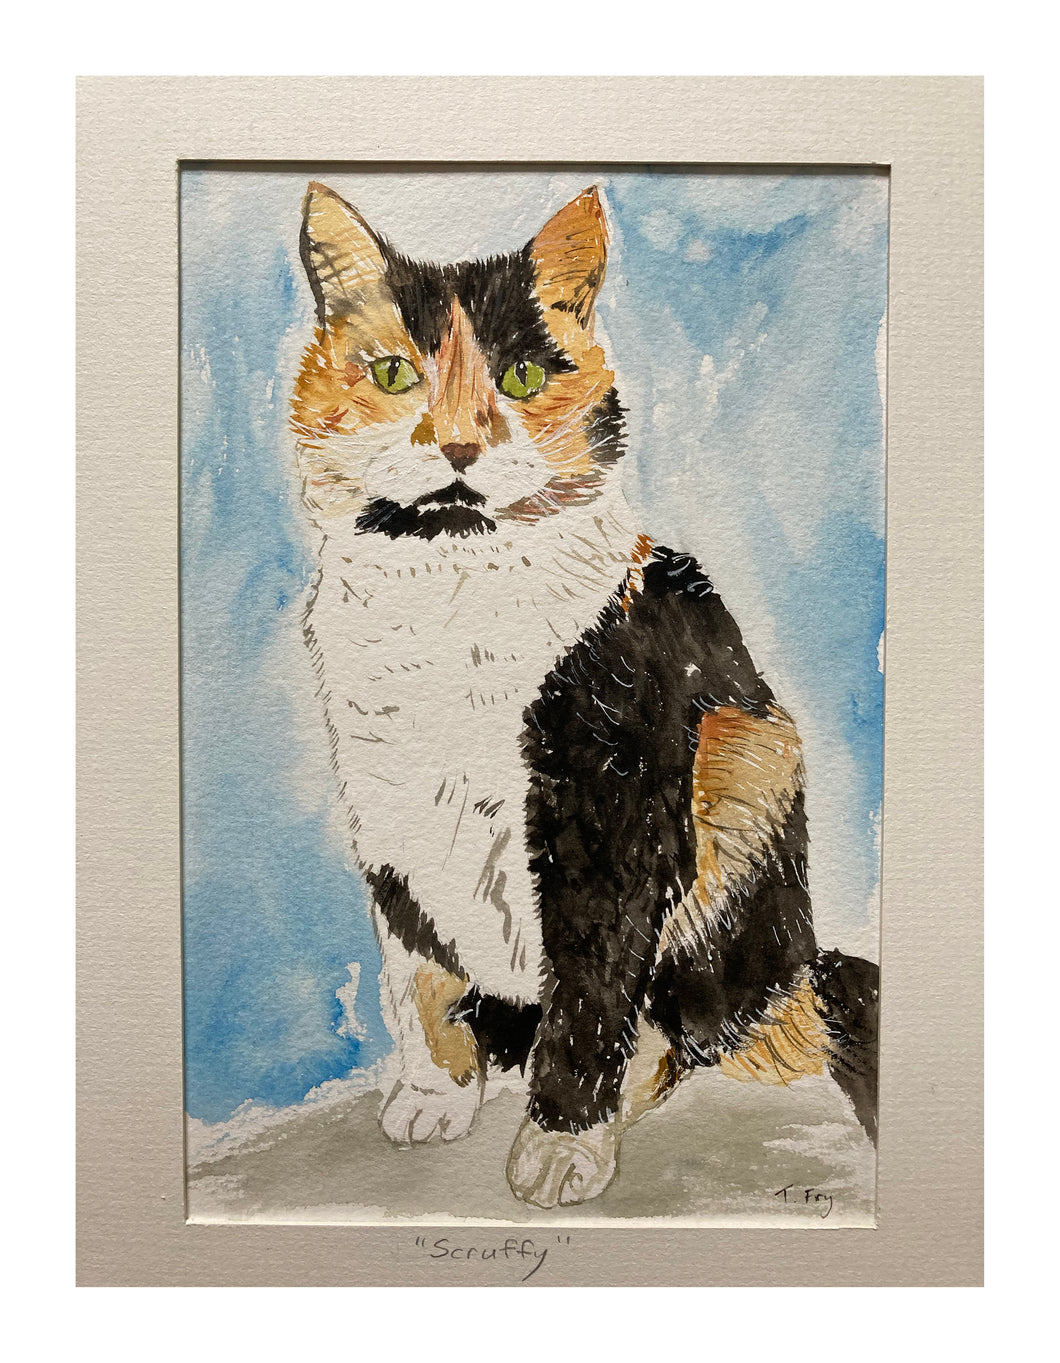 Pet portraits made to order